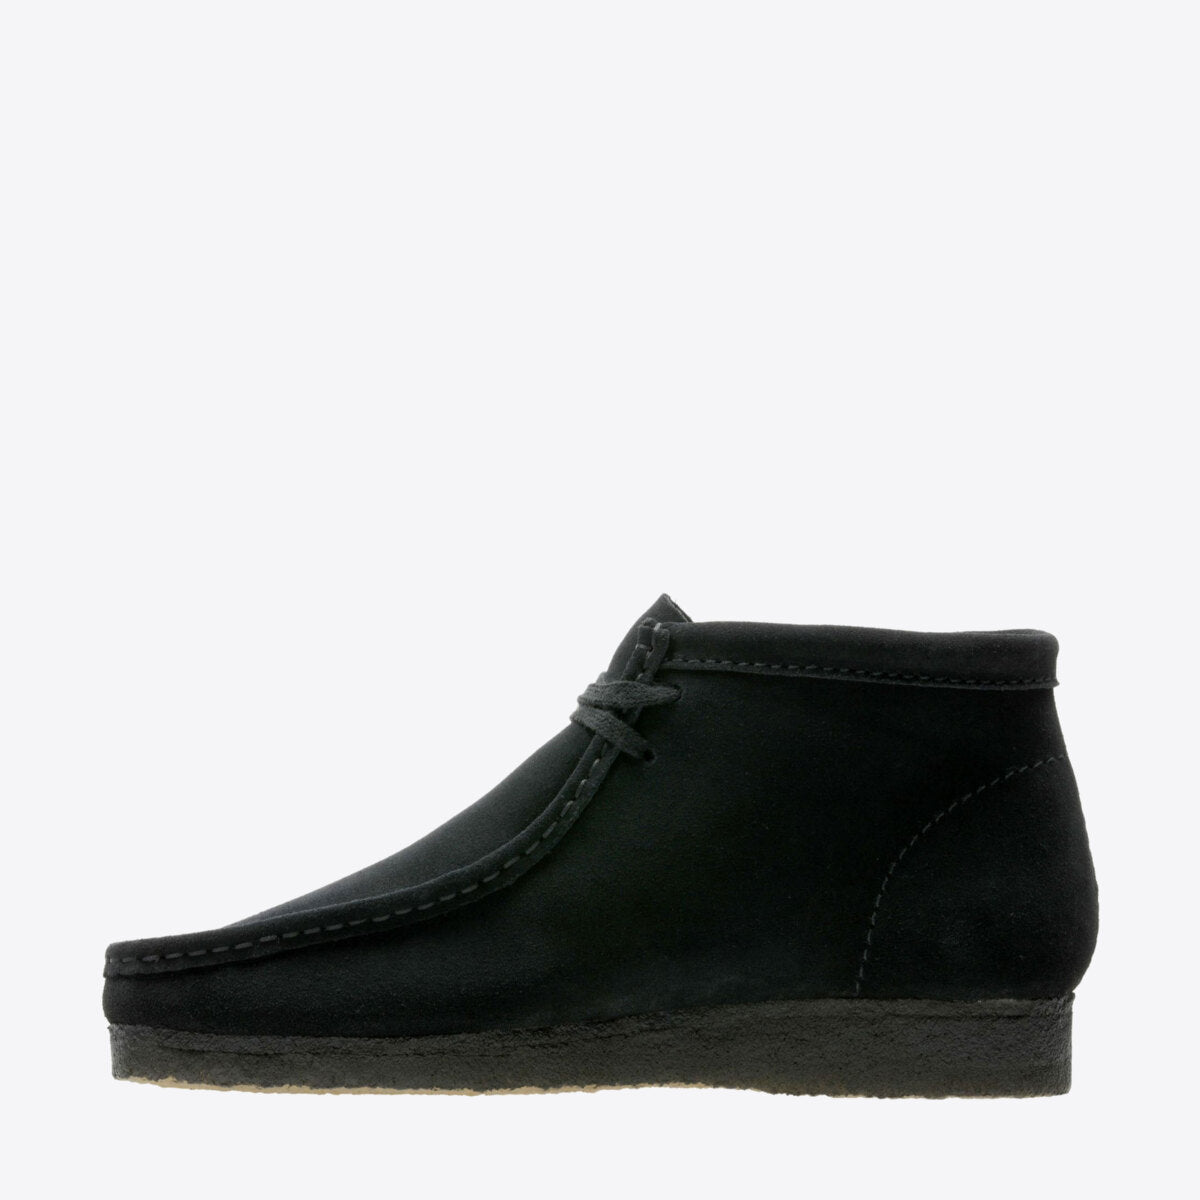 CLARKS Wallabee Boot Suede Black - Image 5